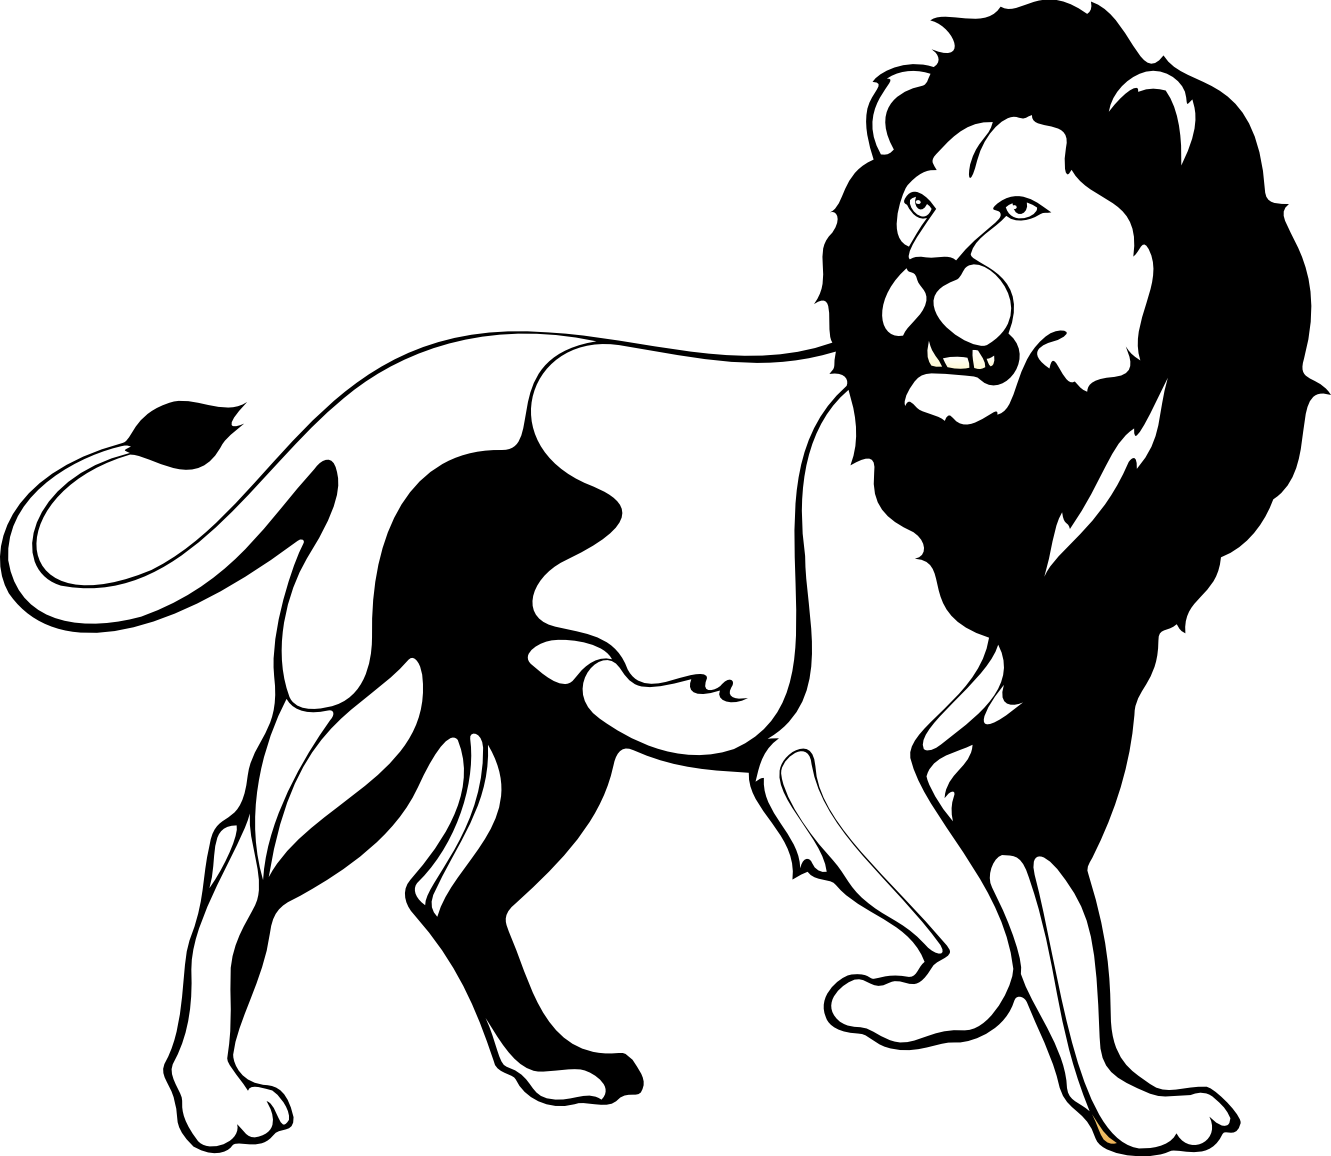 Pix For > Black And White Lion Graphic